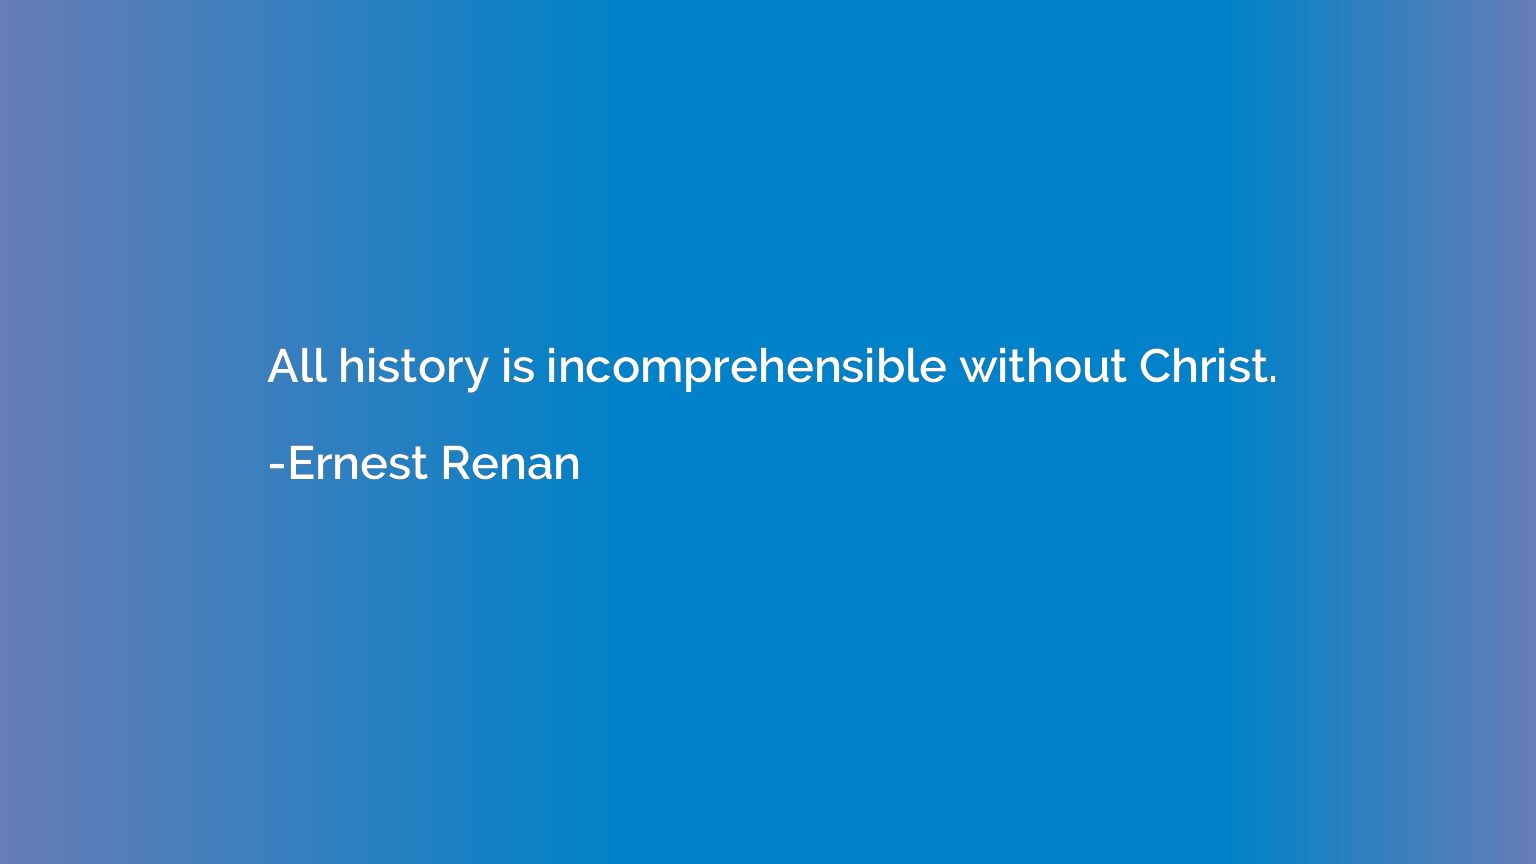 All history is incomprehensible without Christ.